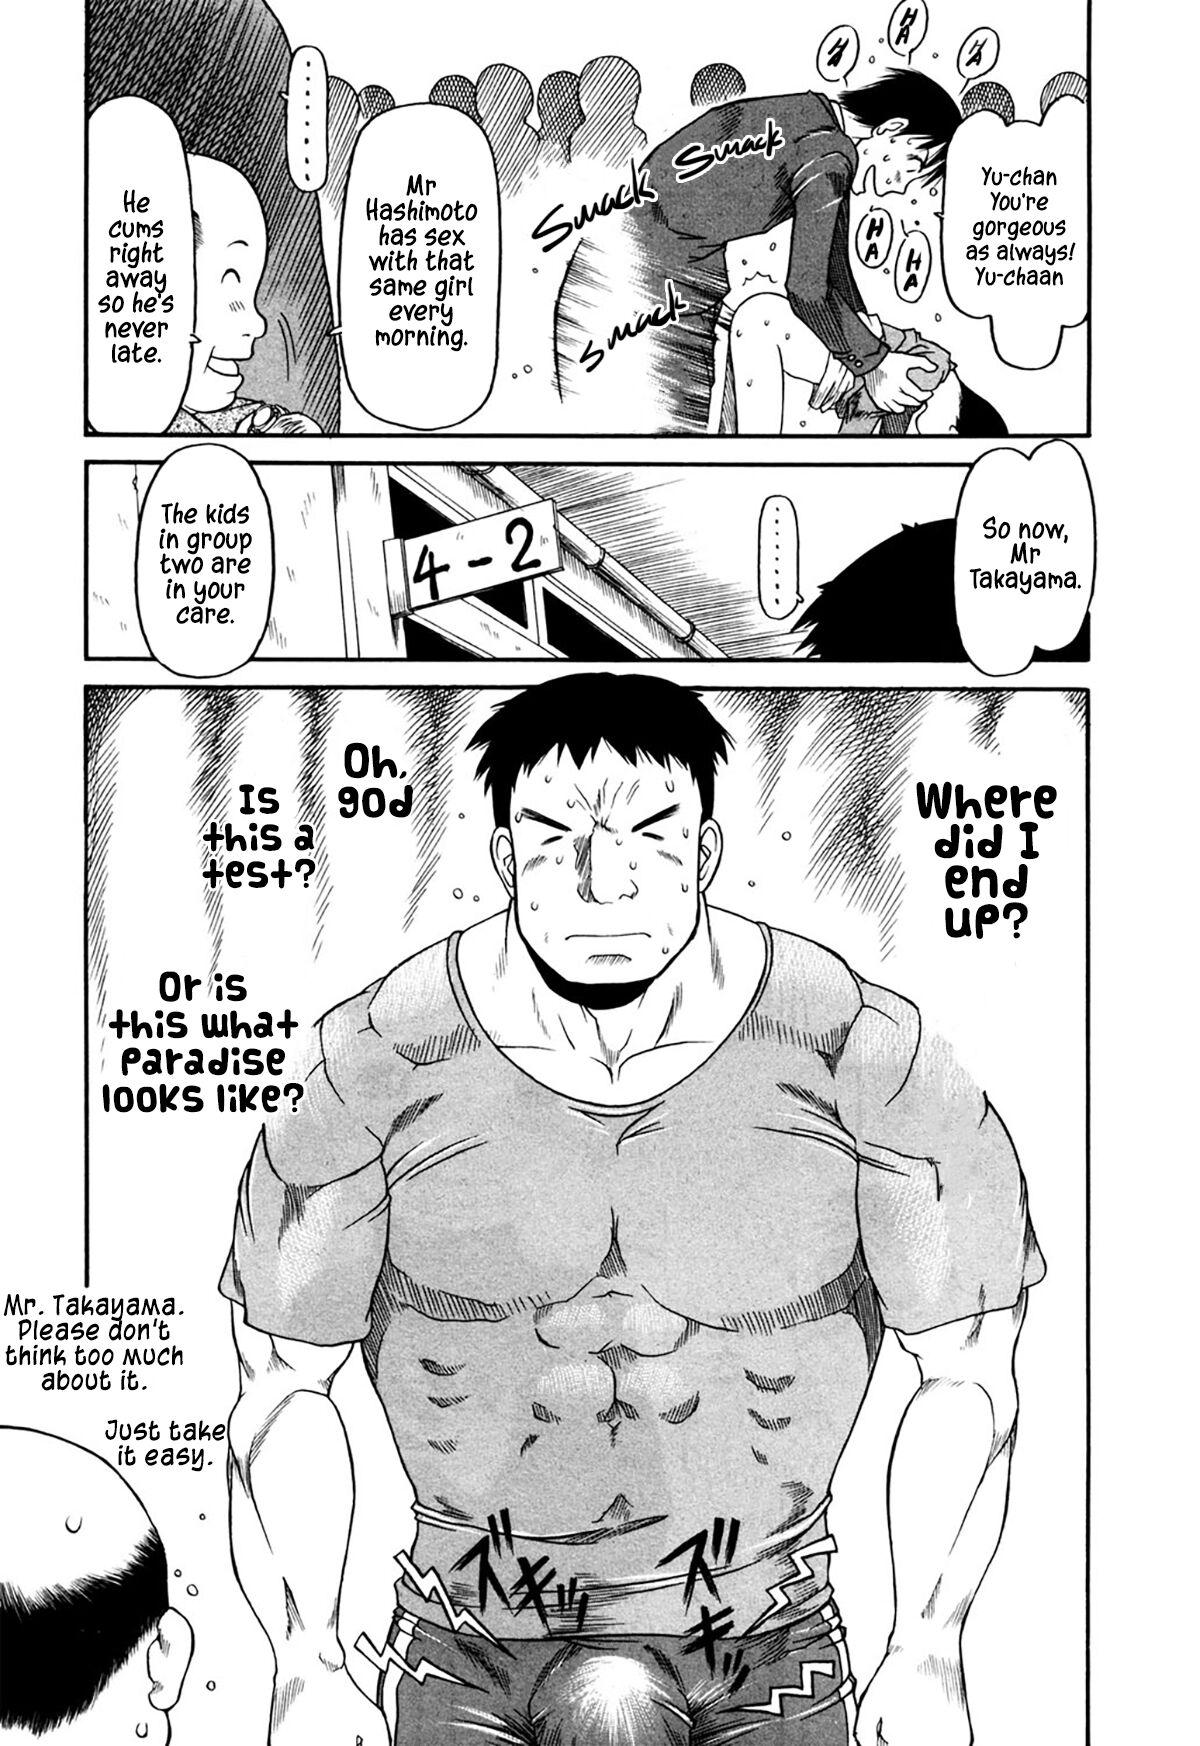 Mouth Muscle Sensei | Mr. Muscle Ch. 1 Village - Picture 3